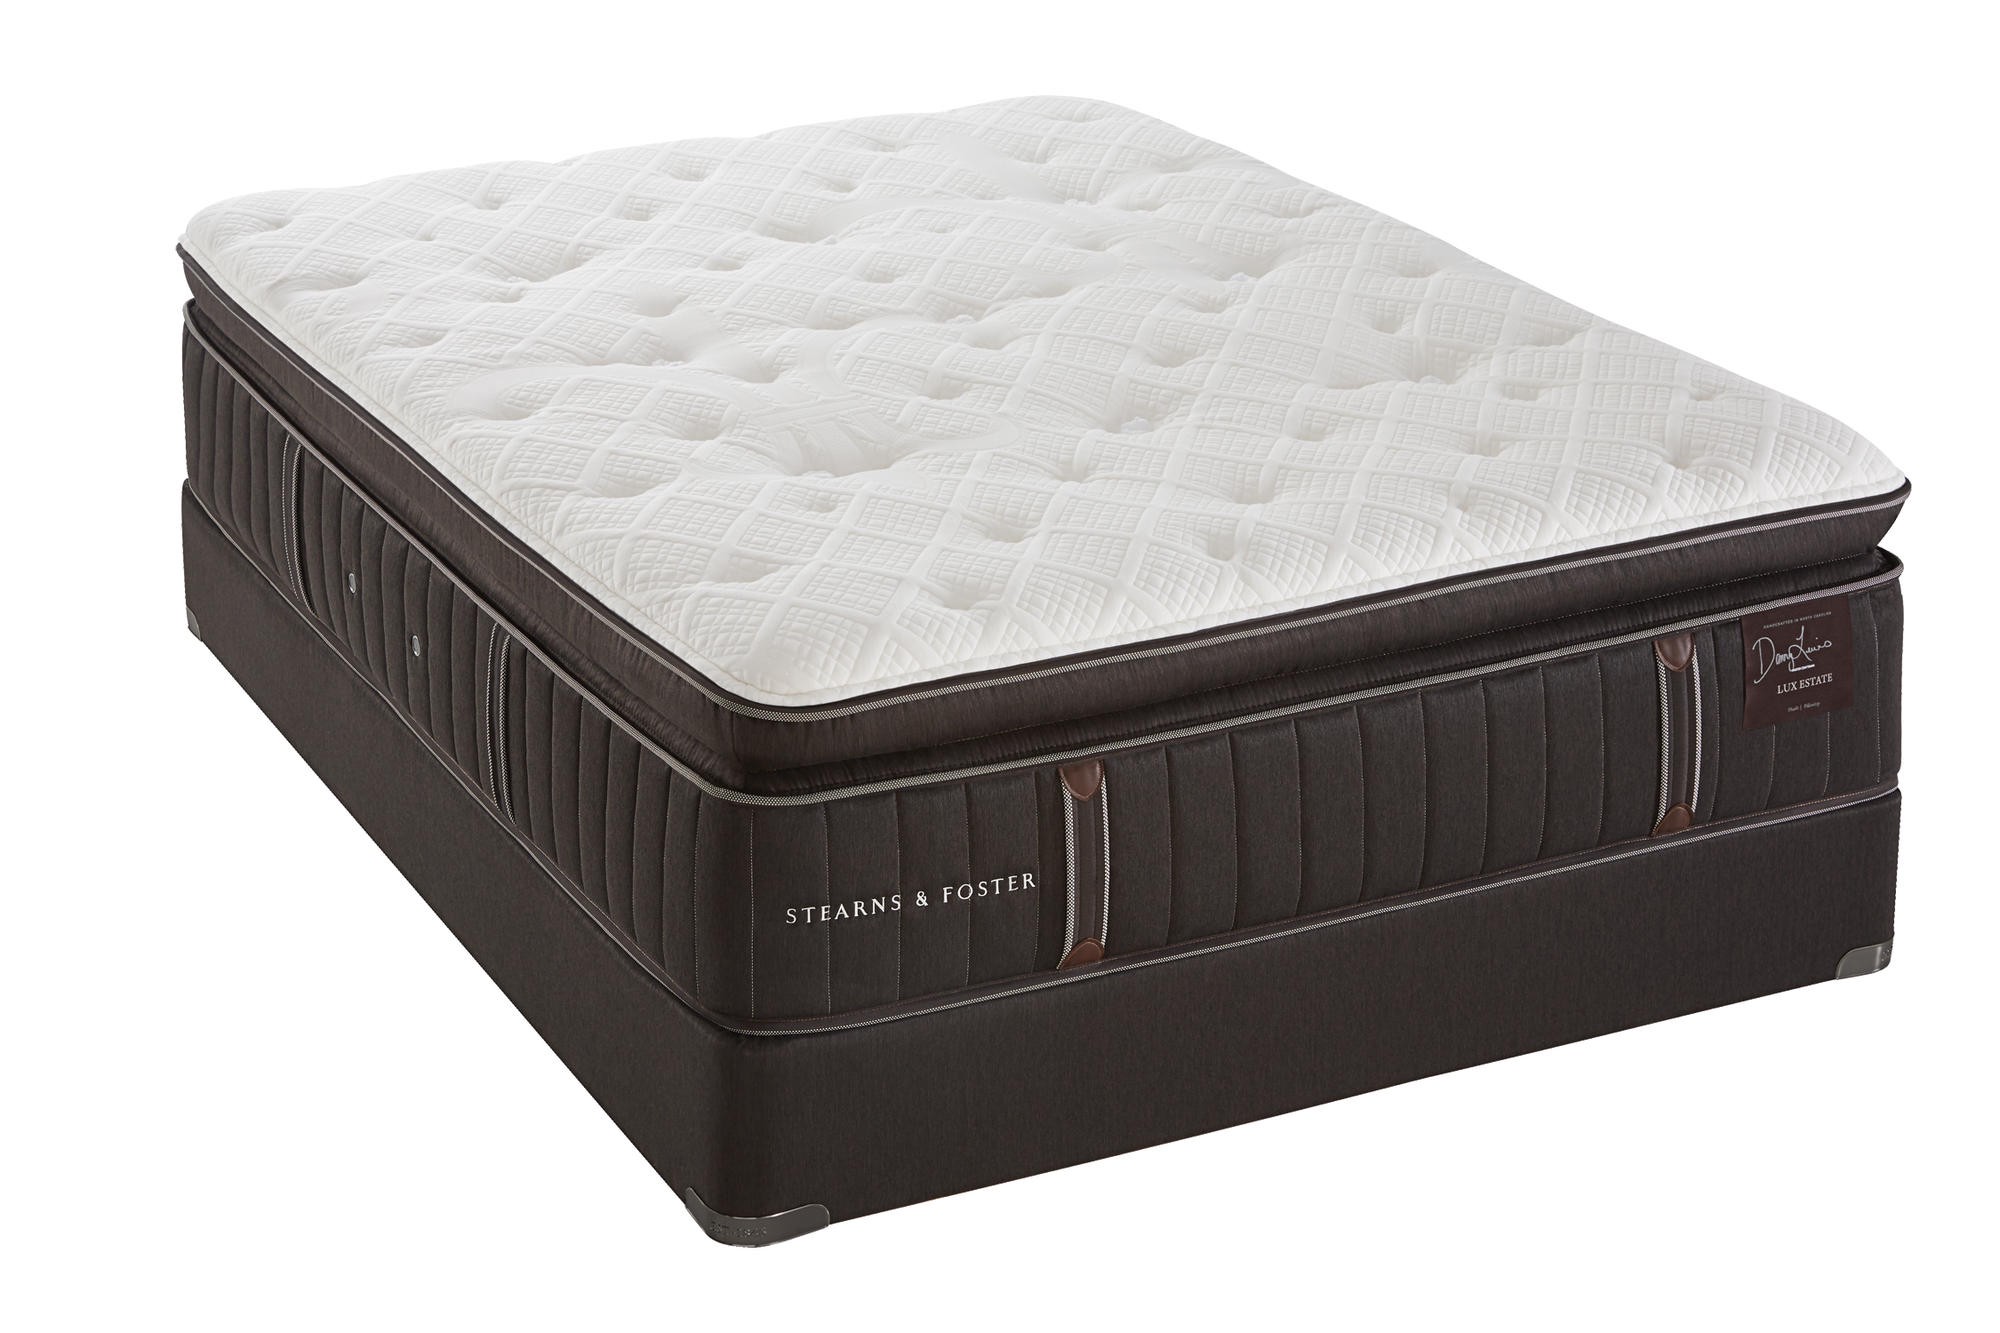 Why stearns and foster mattress may just have what you need!